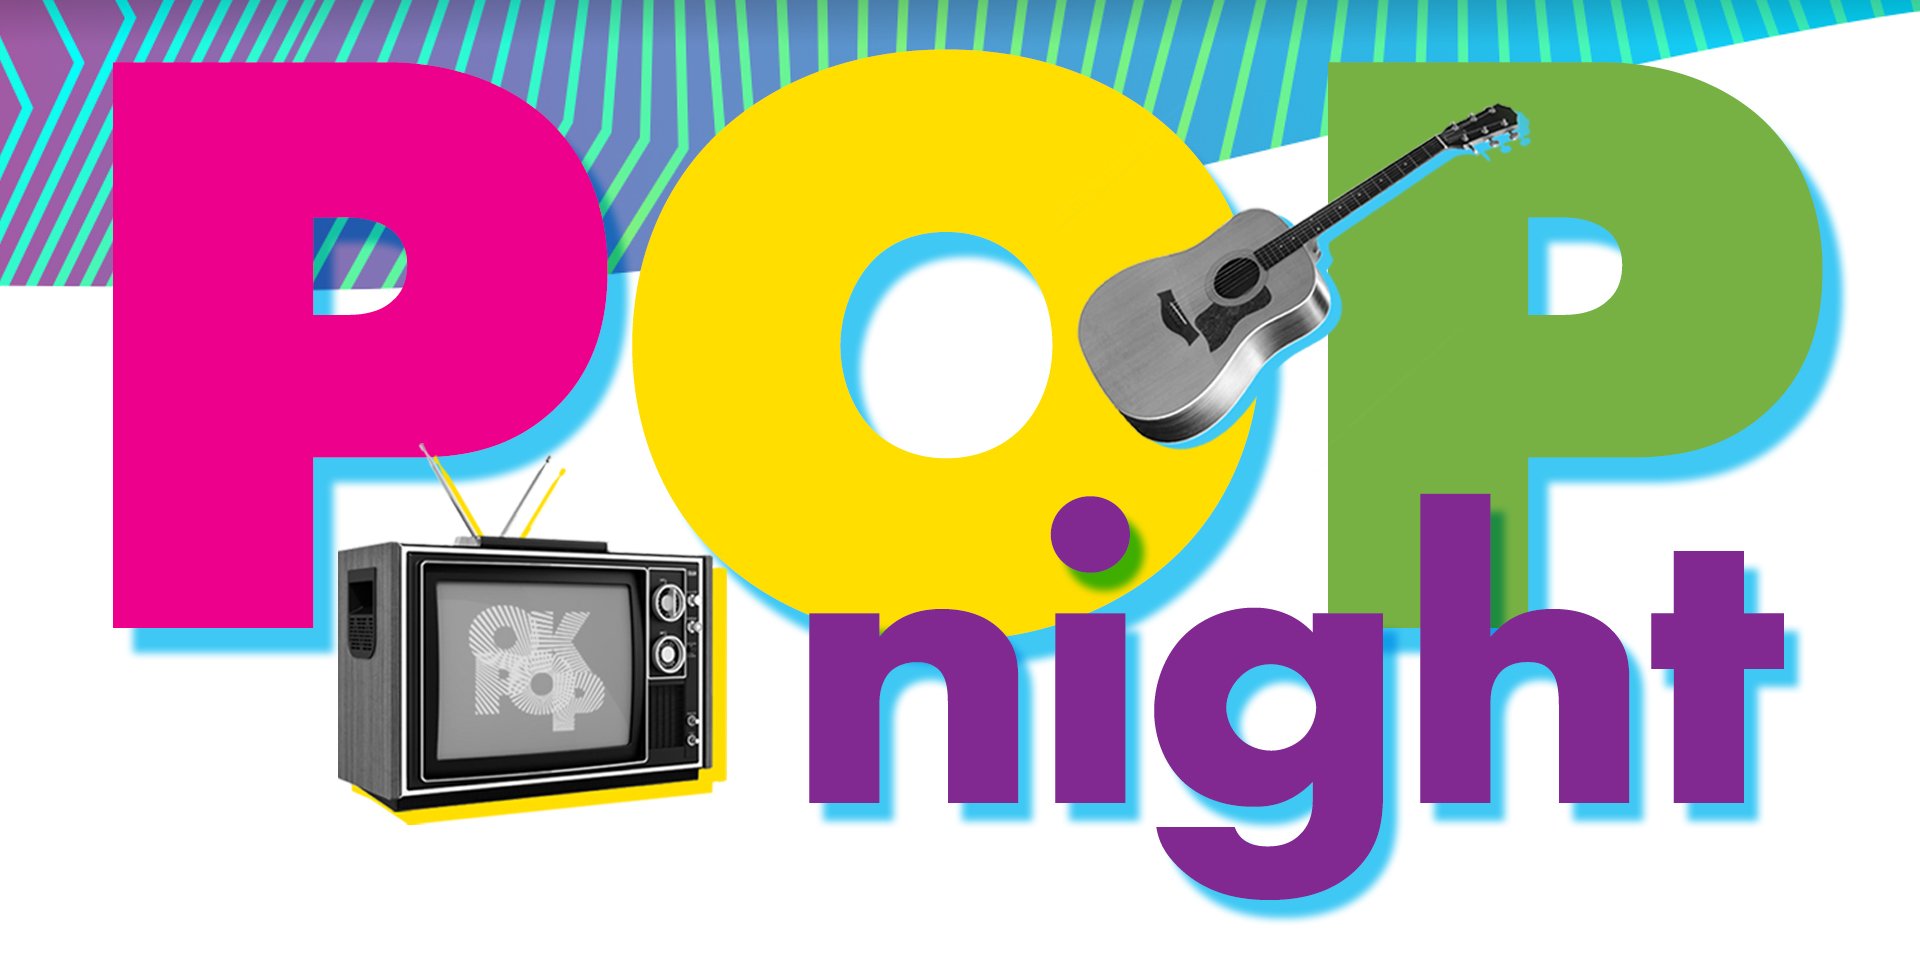 Pop Night in brightly colored text with an image of an old television and guitar overlaid